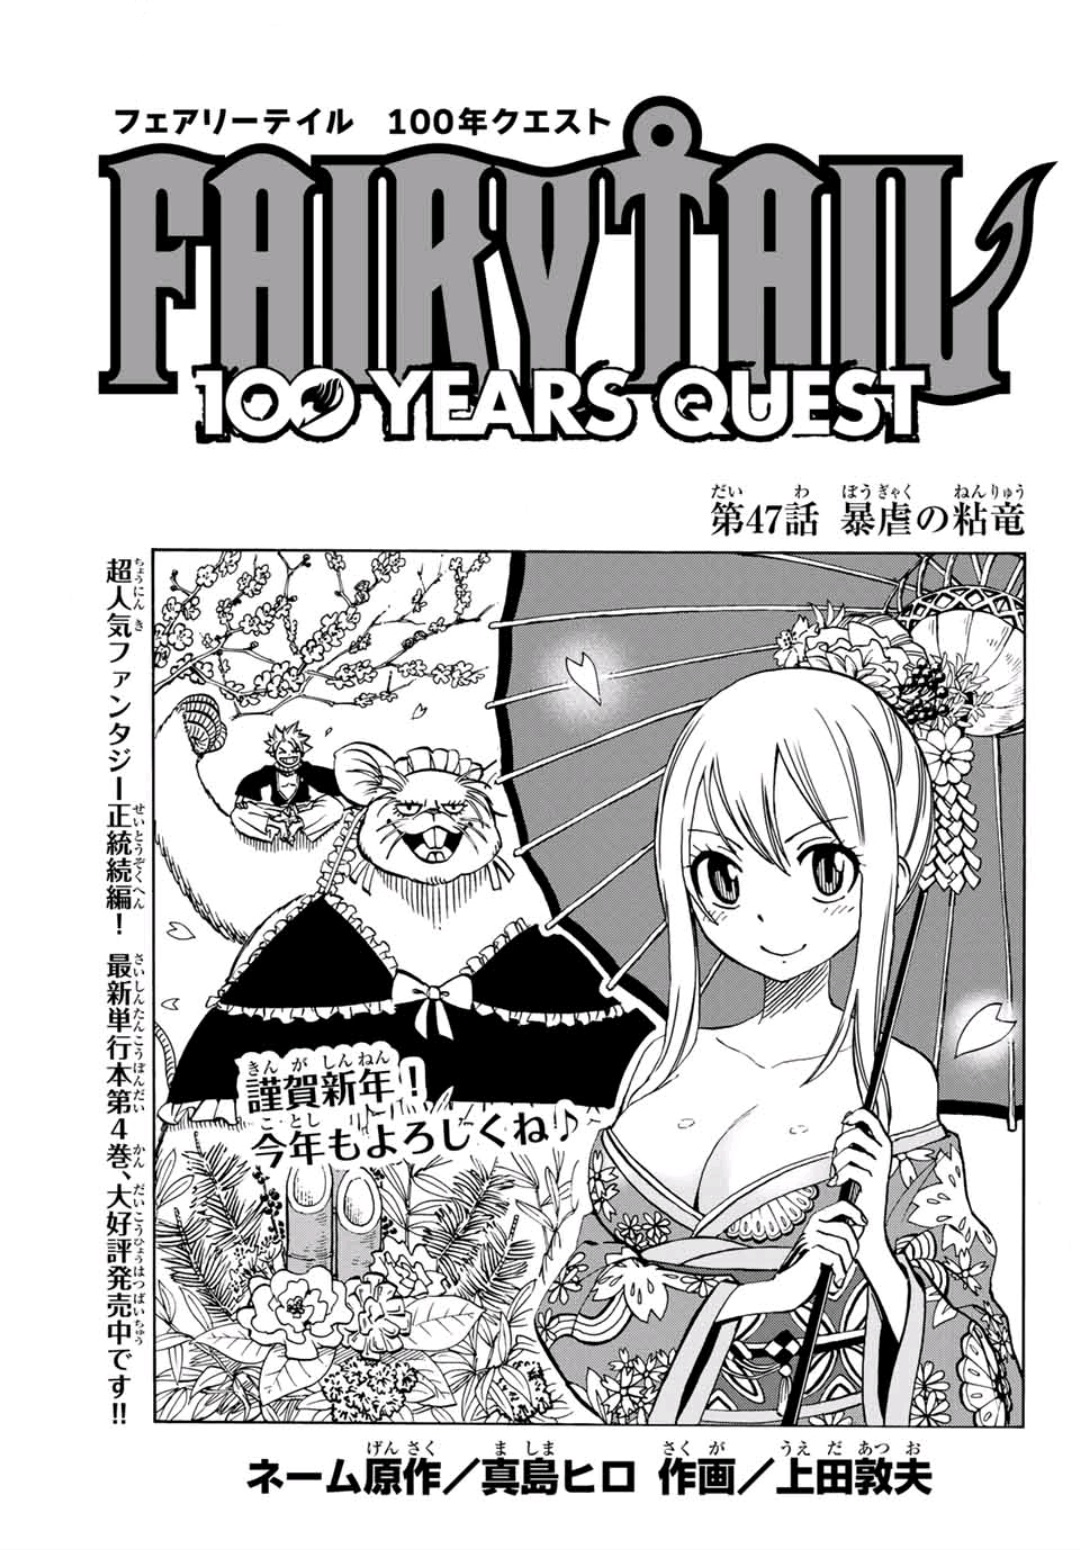 Hiro Mashima Universe on Twitter New info about Fairy Tail 100 Years  Quest anime will be out soon httpstcohfuktSNgYS  Twitter